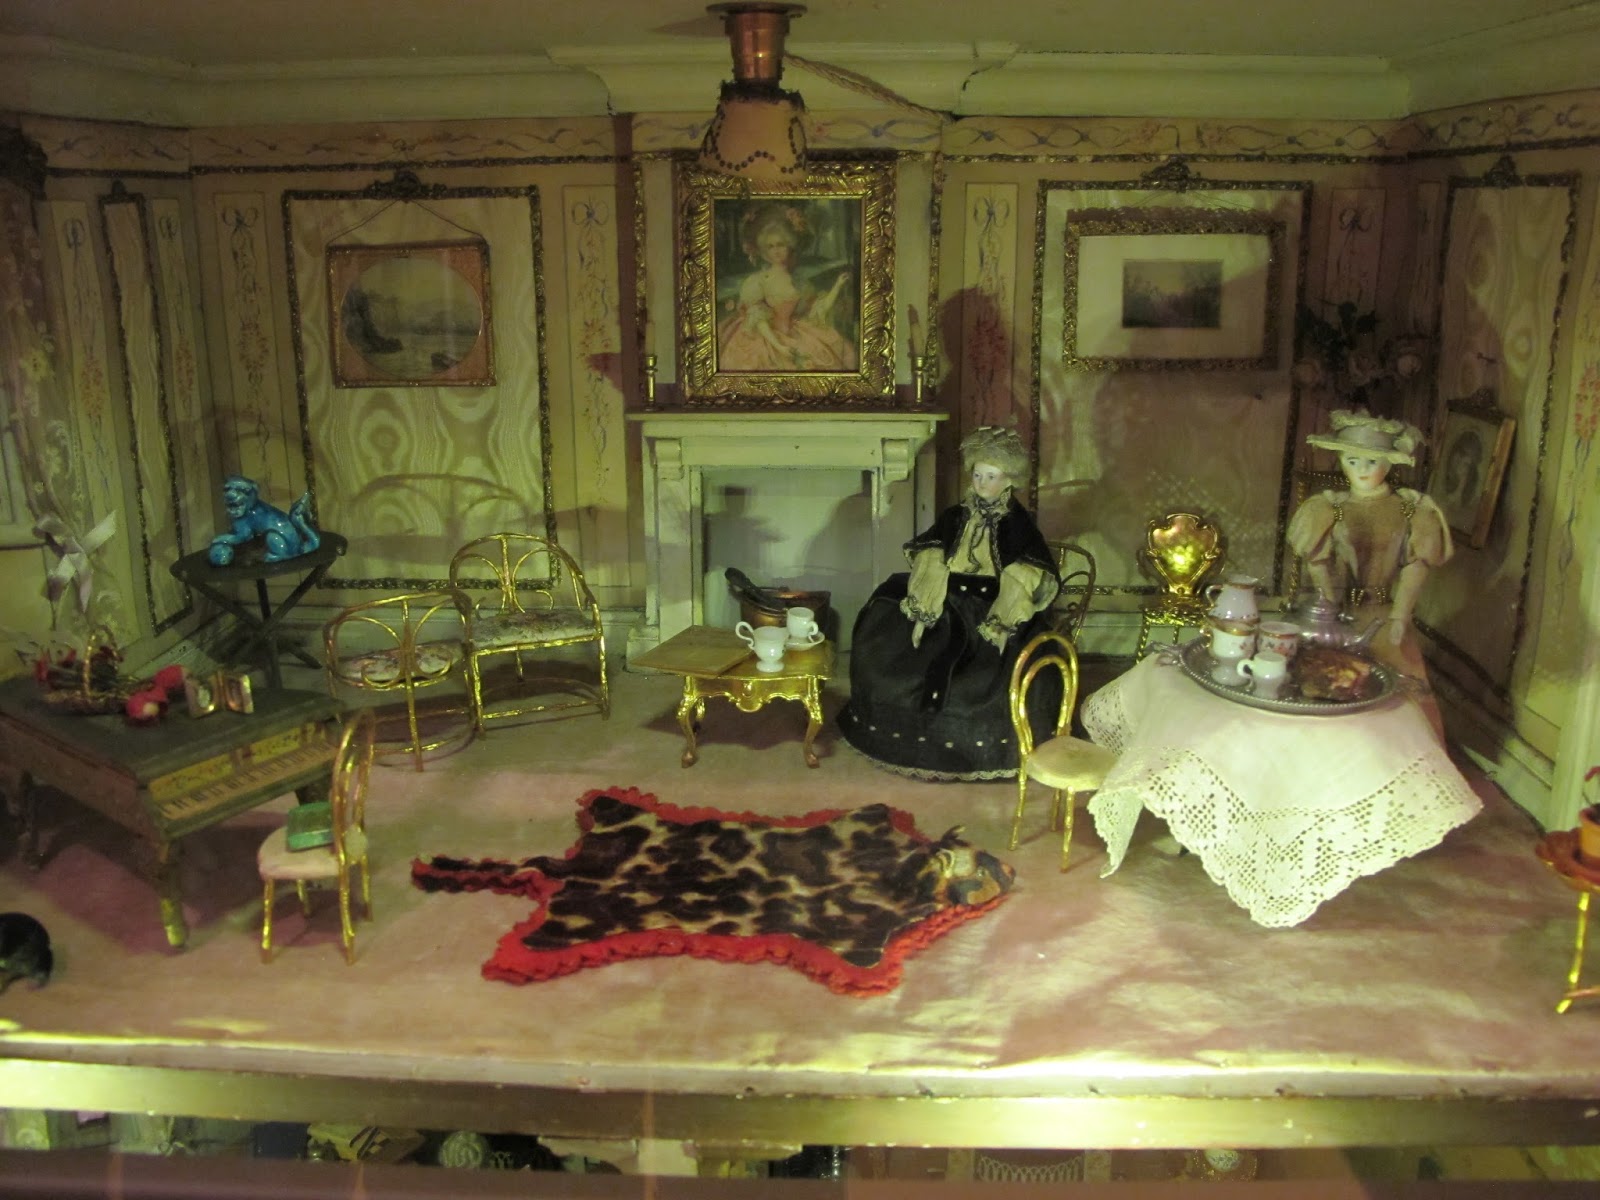 Susan's Mini Homes: Small Stories - V&A Dollhouses at the National ...